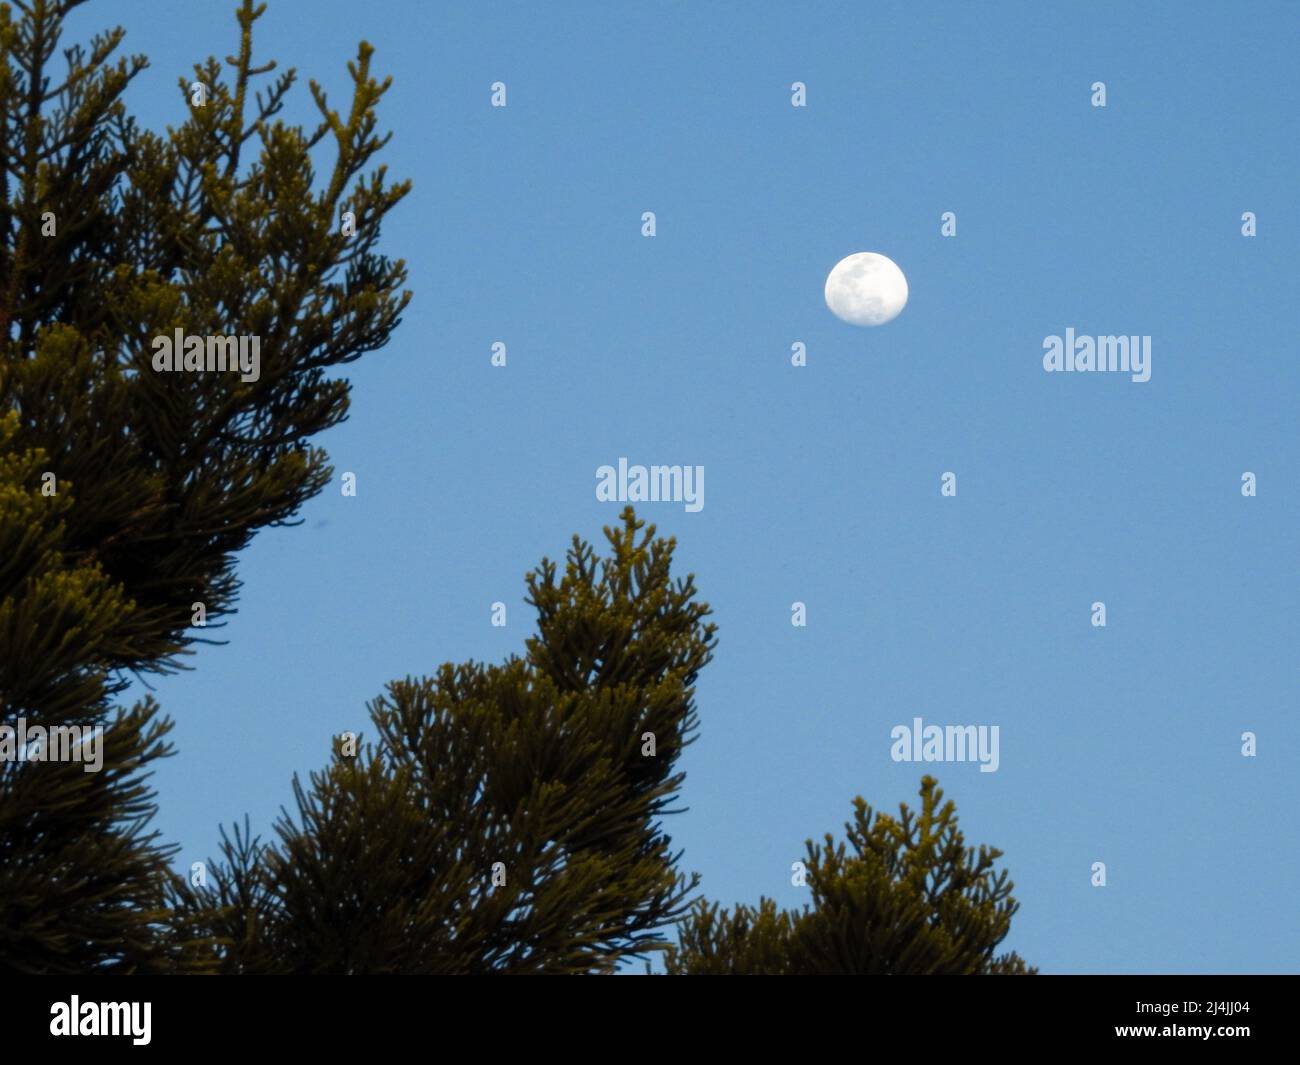 A wide angle shot of a blue sky with moon and a tree on the foreground. Stock Photo